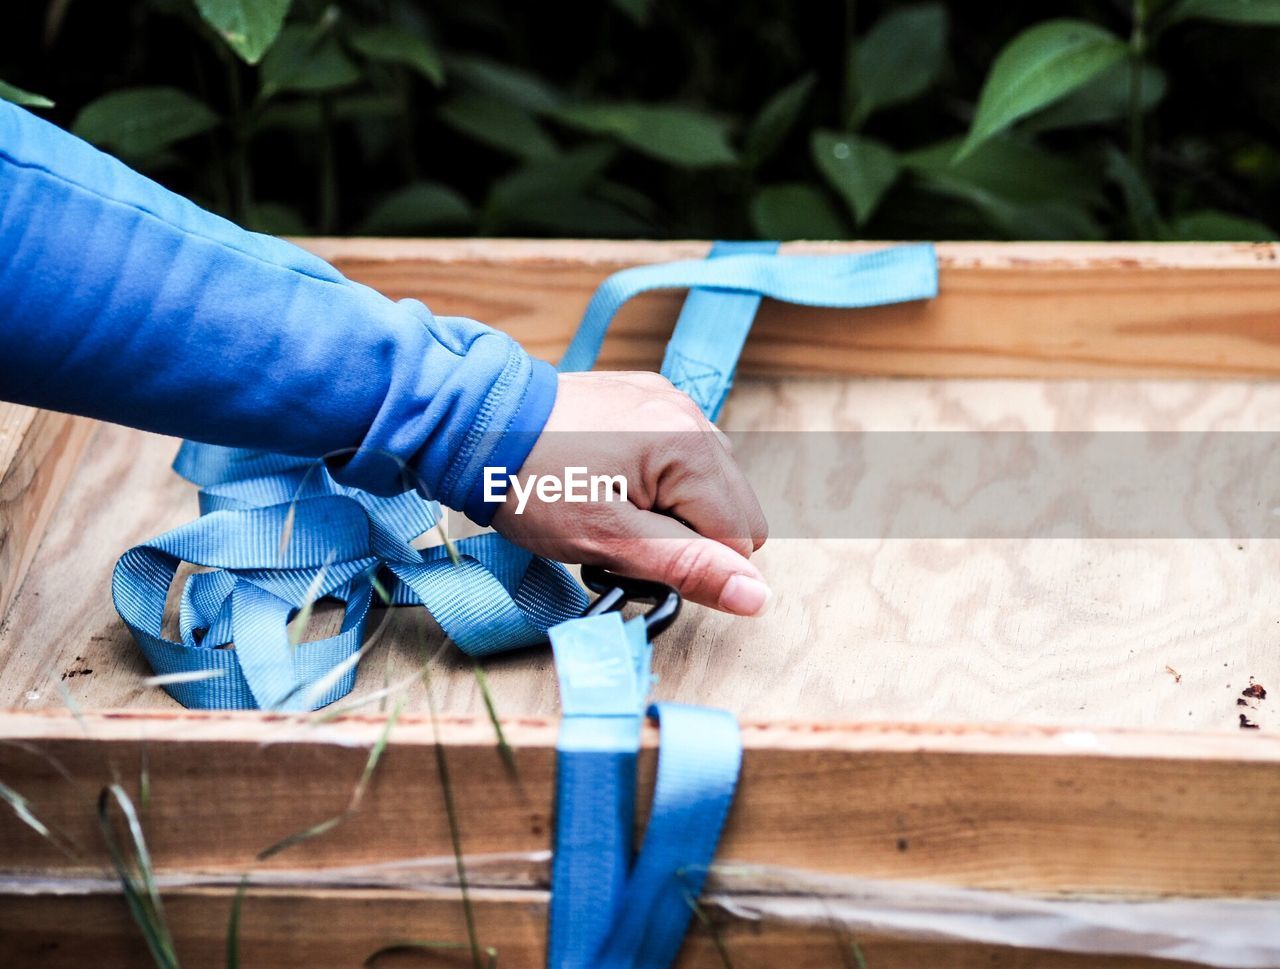 Cropped hand holding blue strap on wooden box